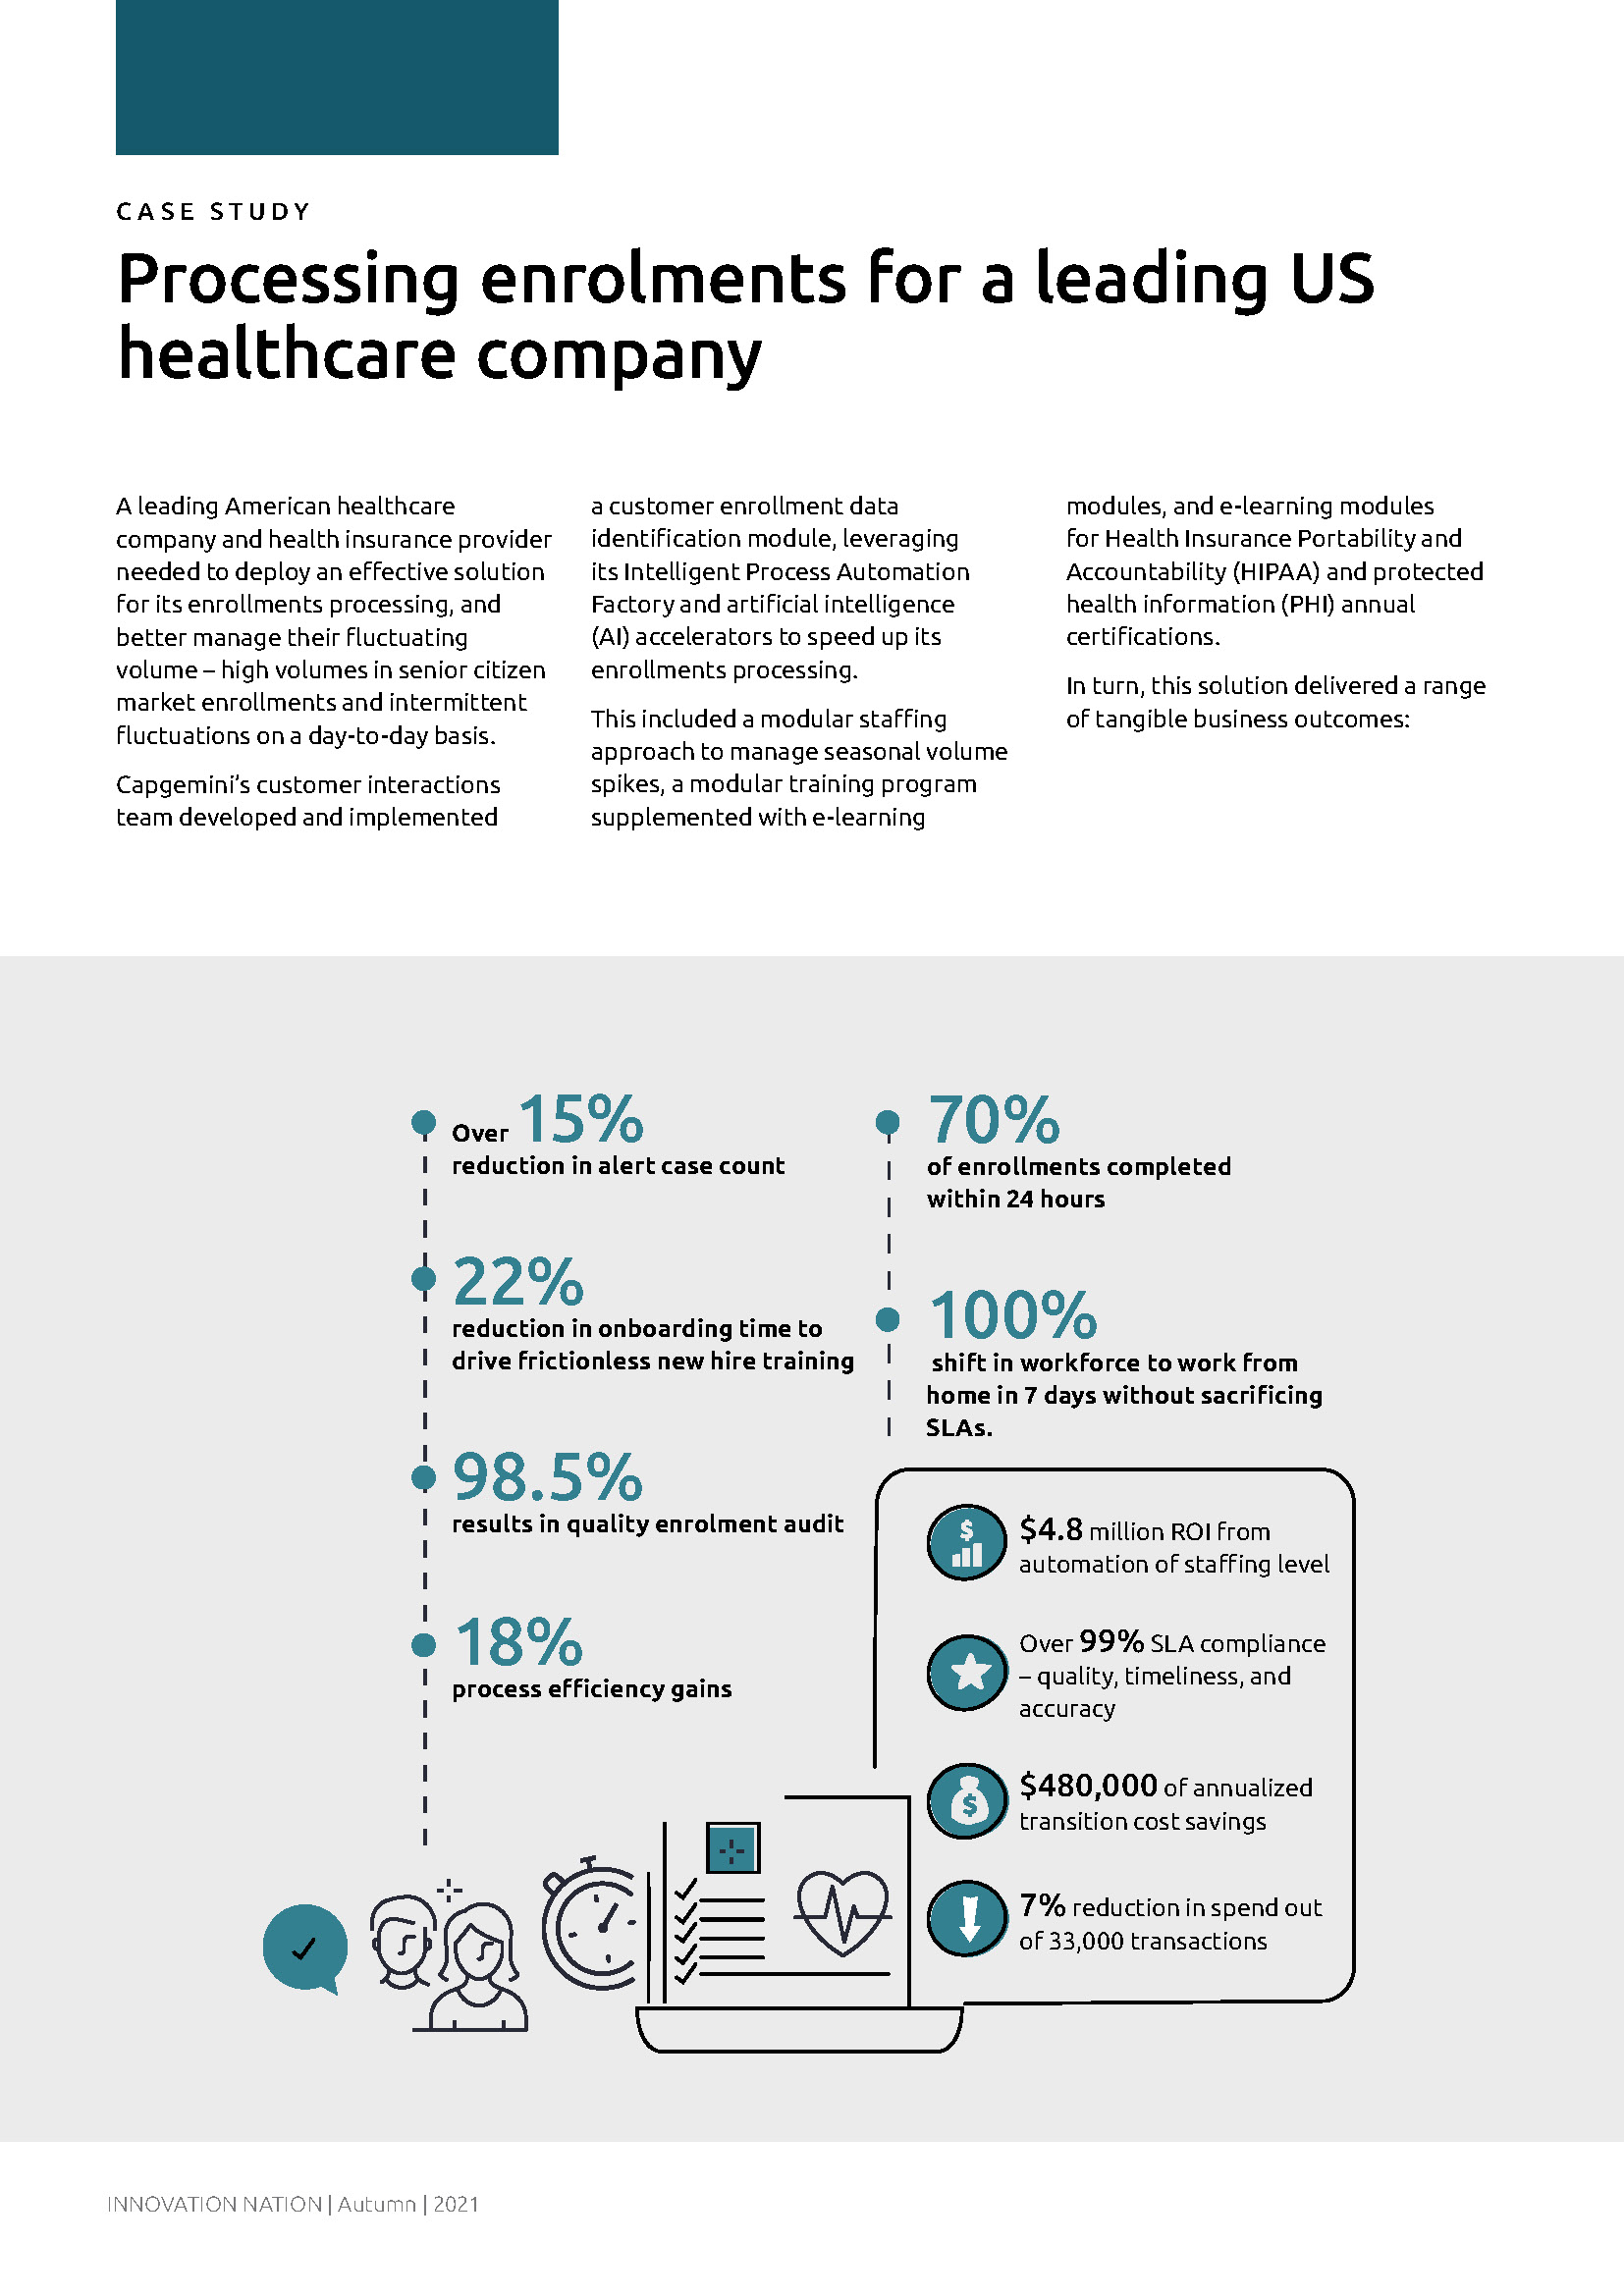 CASE STUDY - Processing enrolments for a leading US healthcare company v1